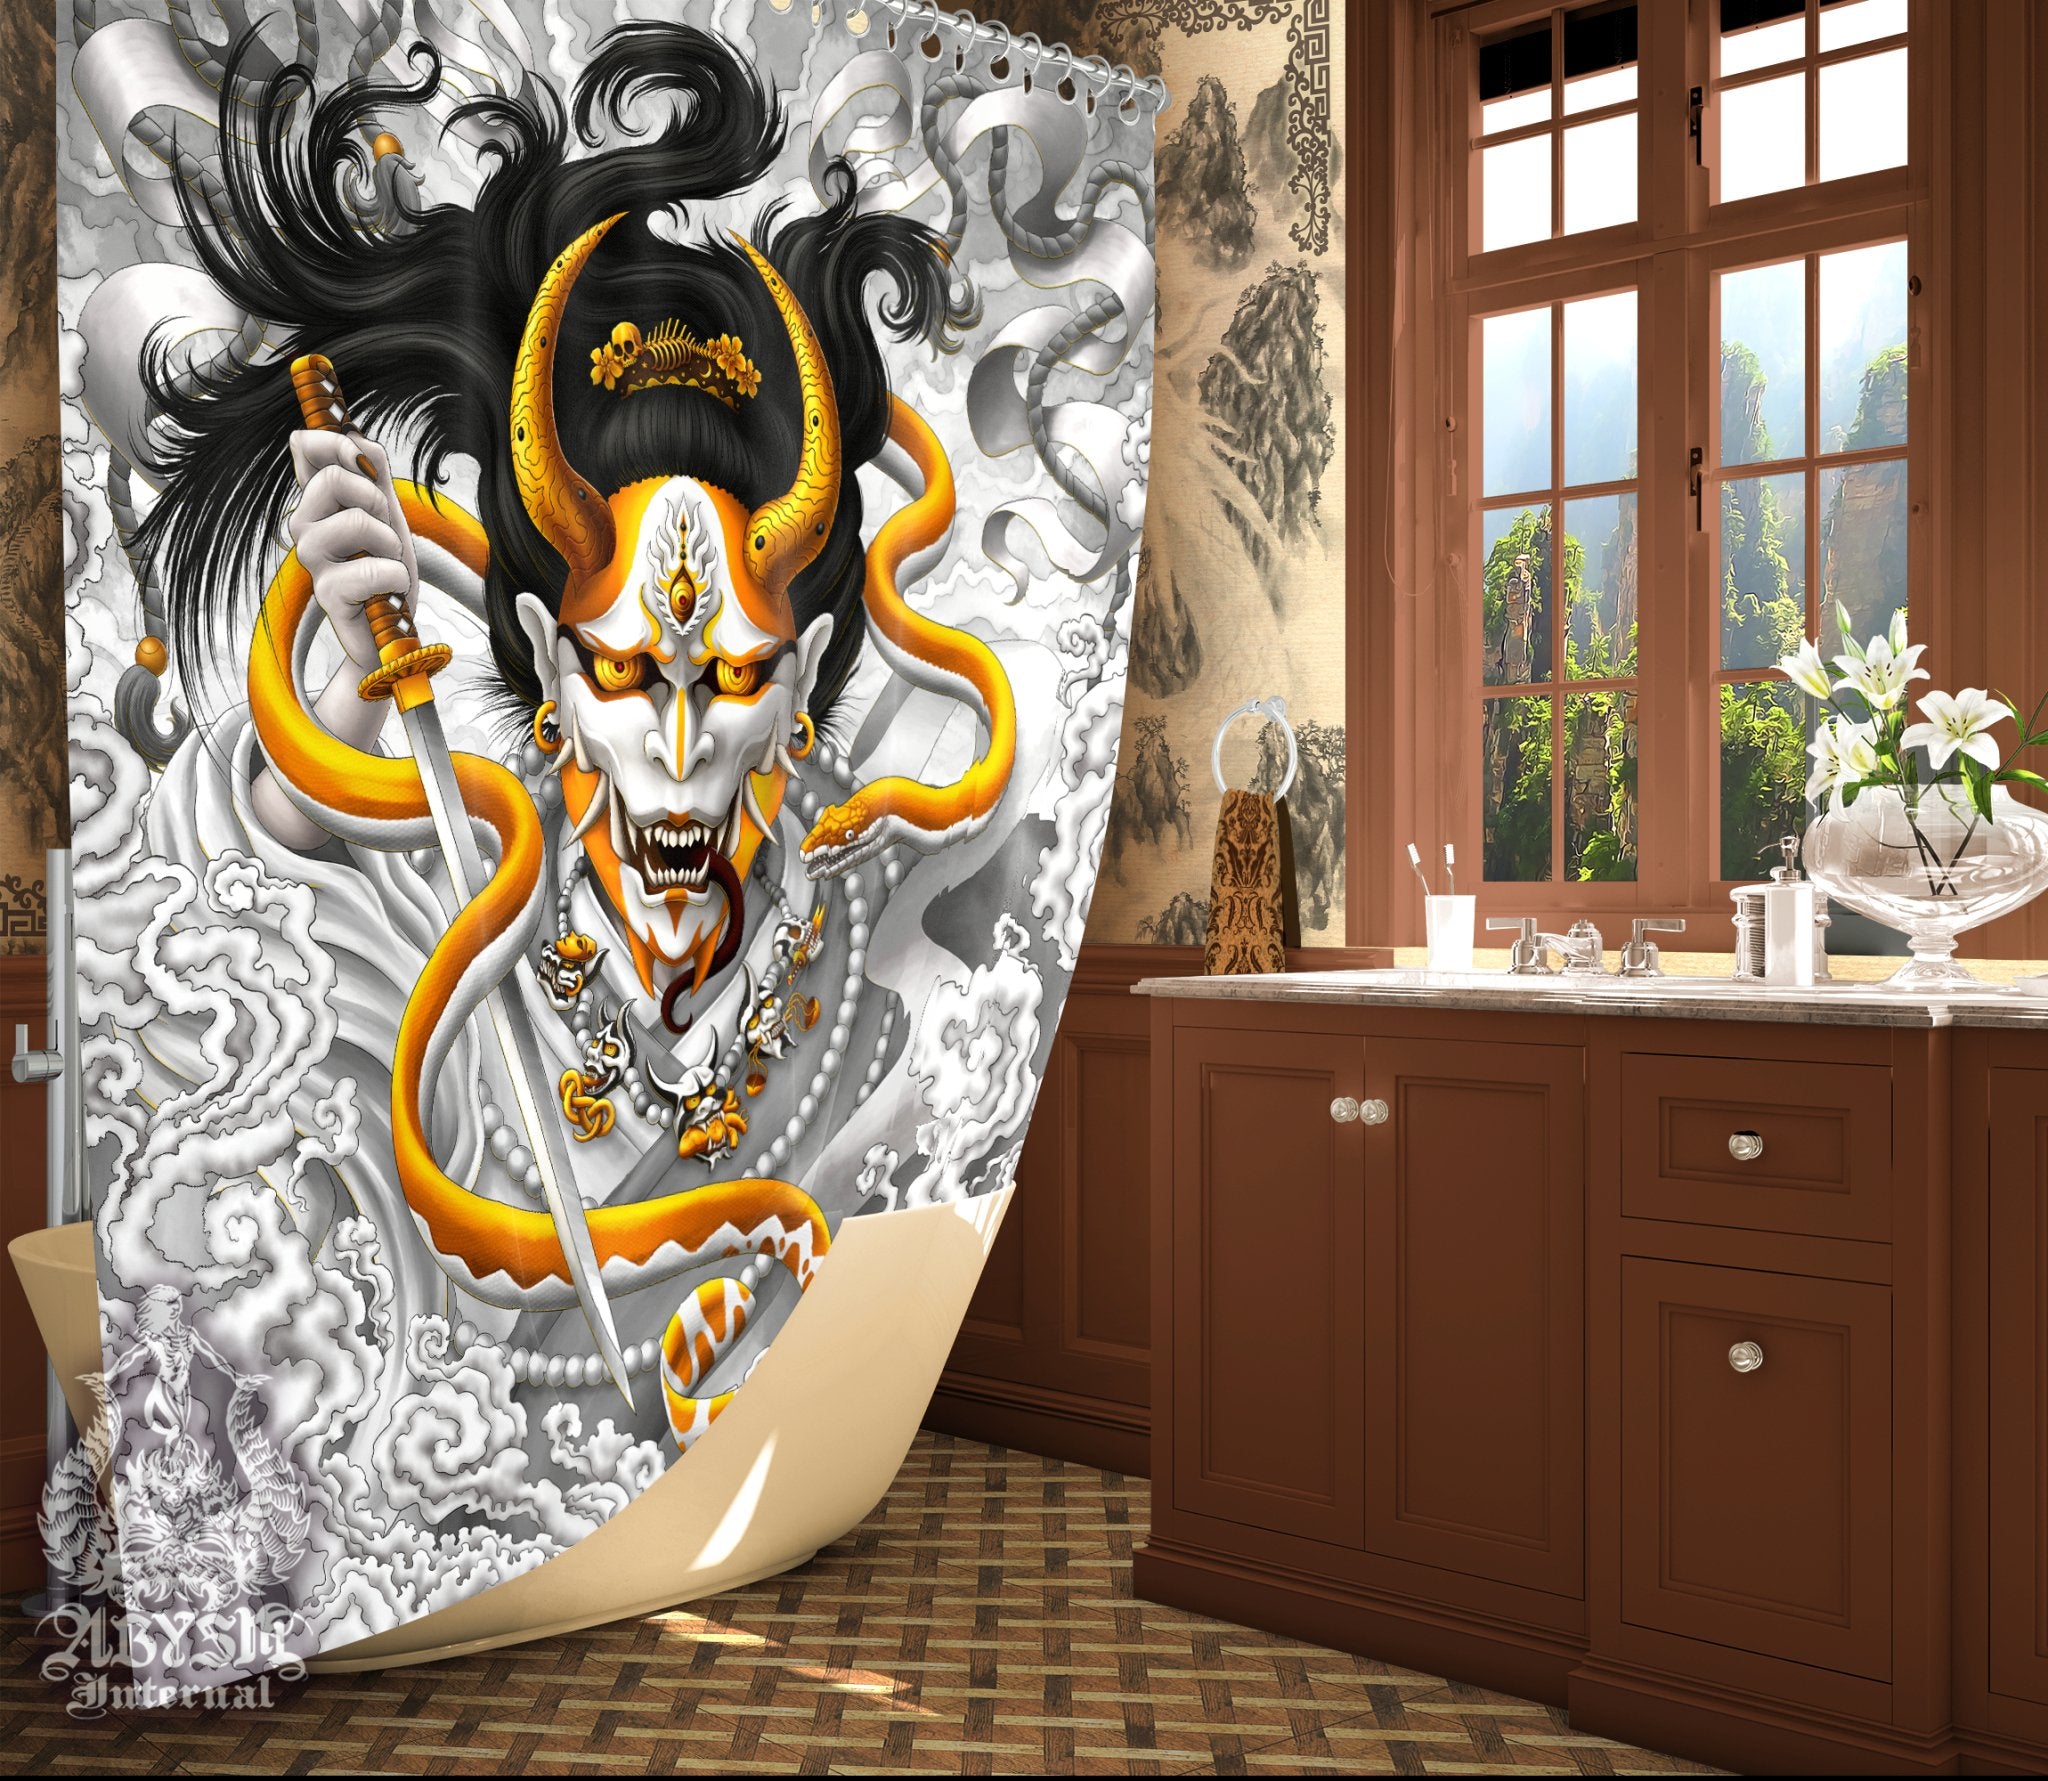 Hannya Shower Curtain, 71x74 inches, Japanese Demon and Snake, Youkai Anime and Gamer Bathroom Decor - Gold White - Abysm Internal